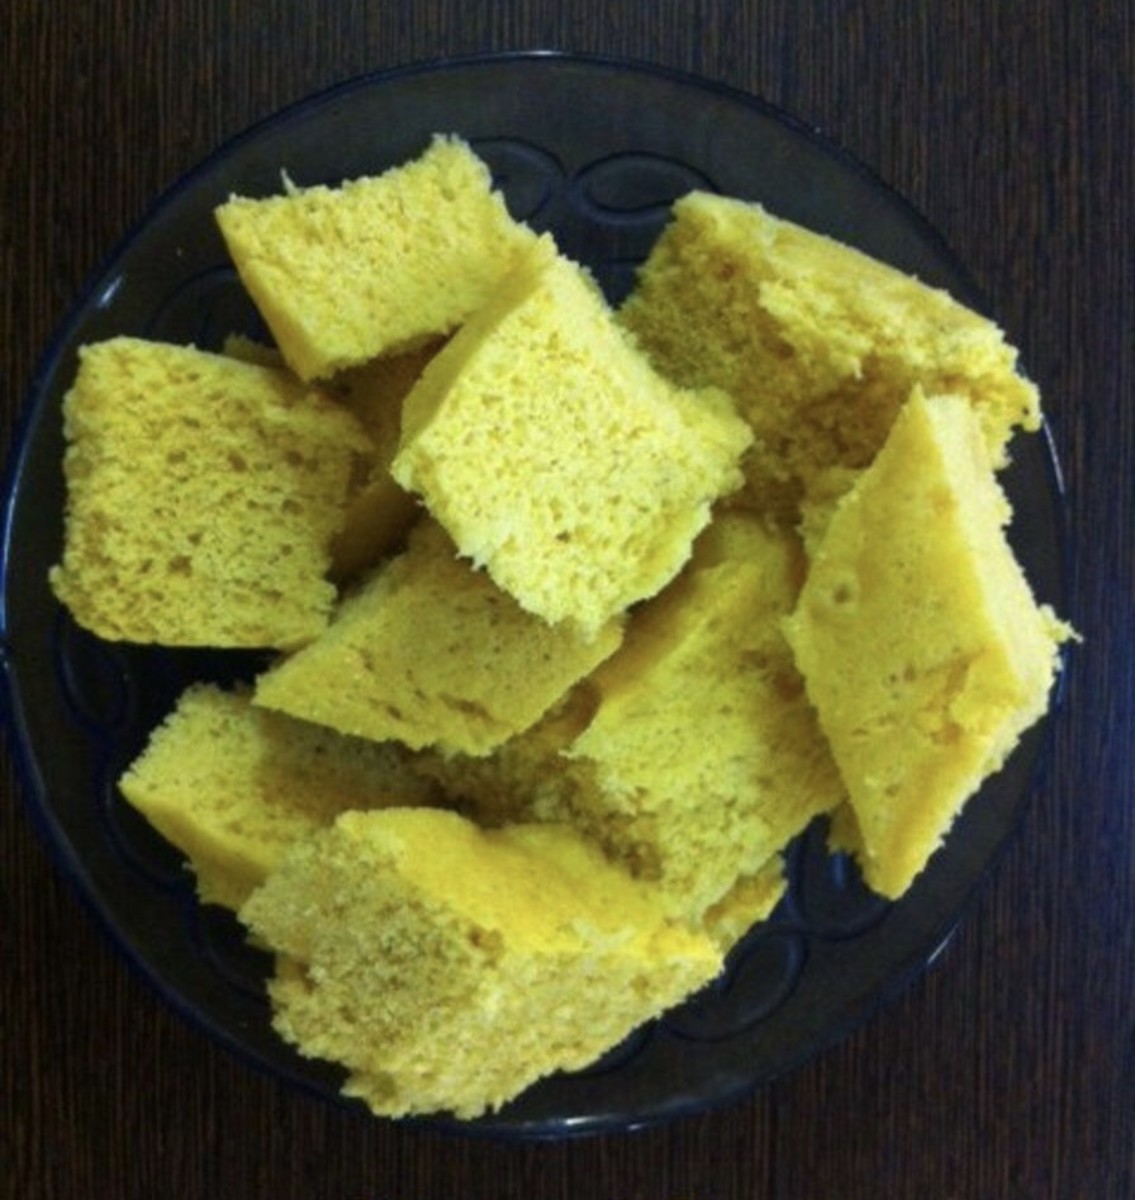 Cut the dhokla into desired pieces 